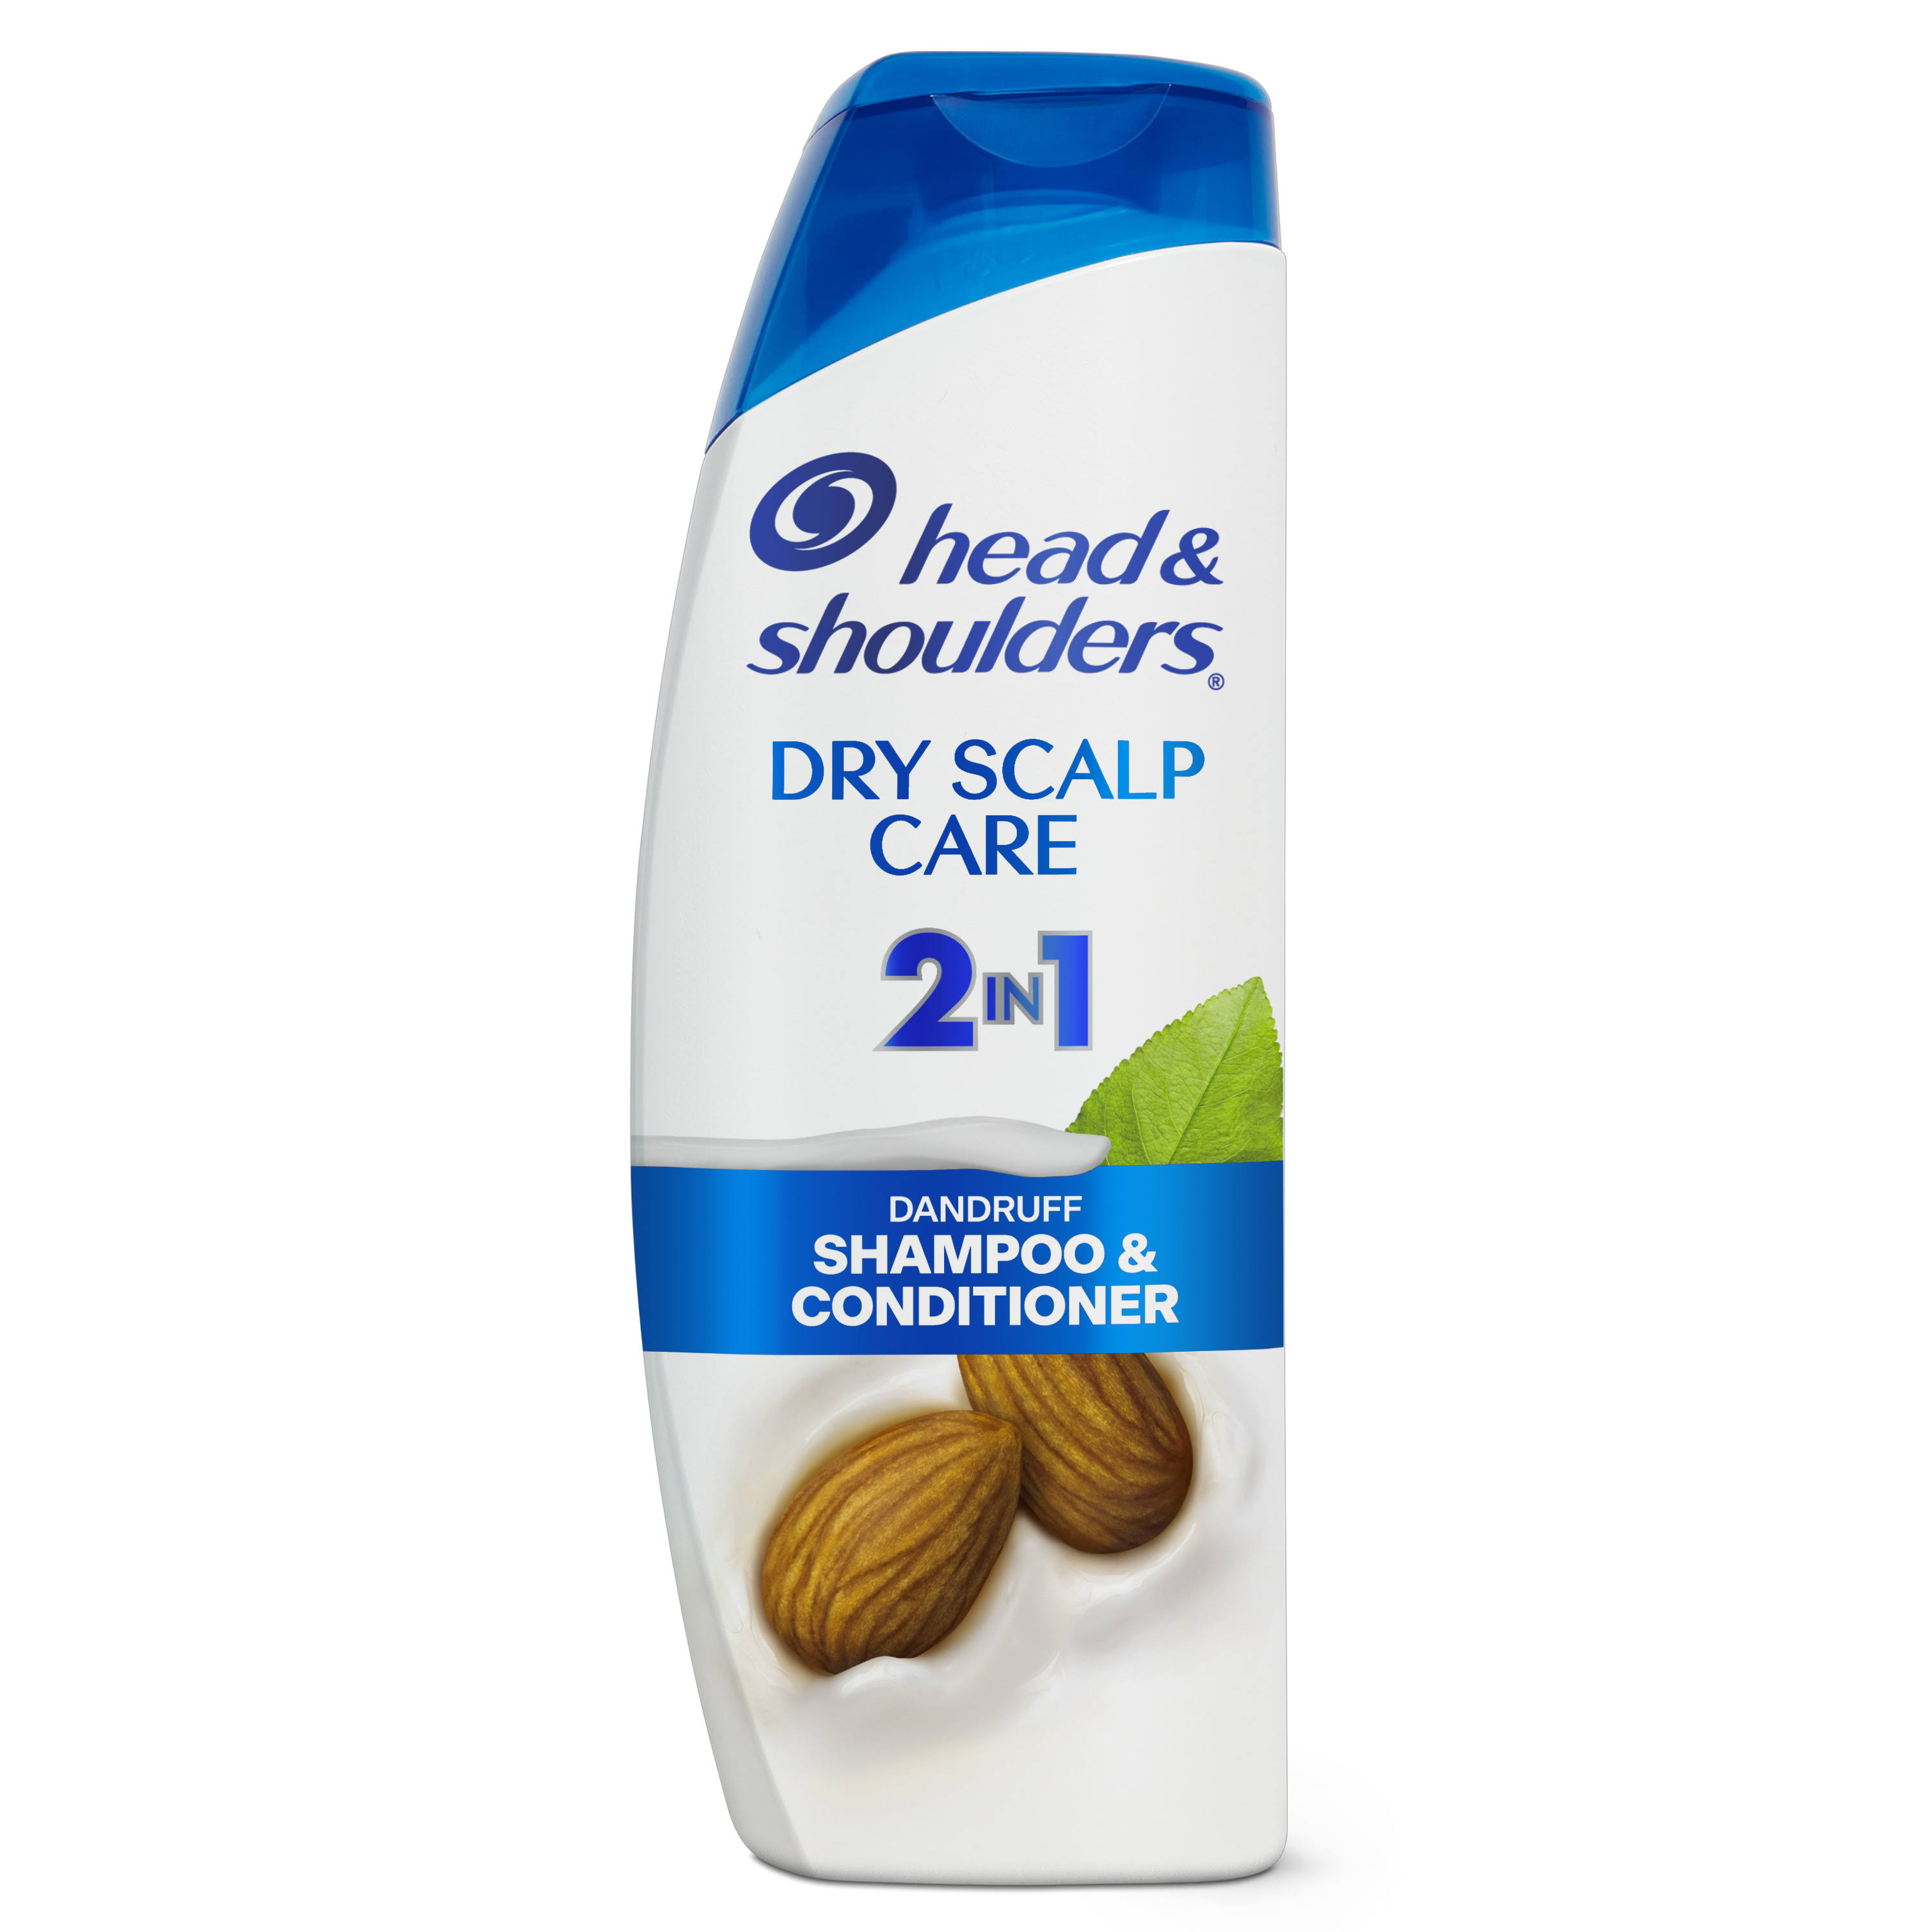 Head and Shoulders 2 in 1 Dandruff Shampoo and Conditioner, Dry Scalp Care 12.5 oz